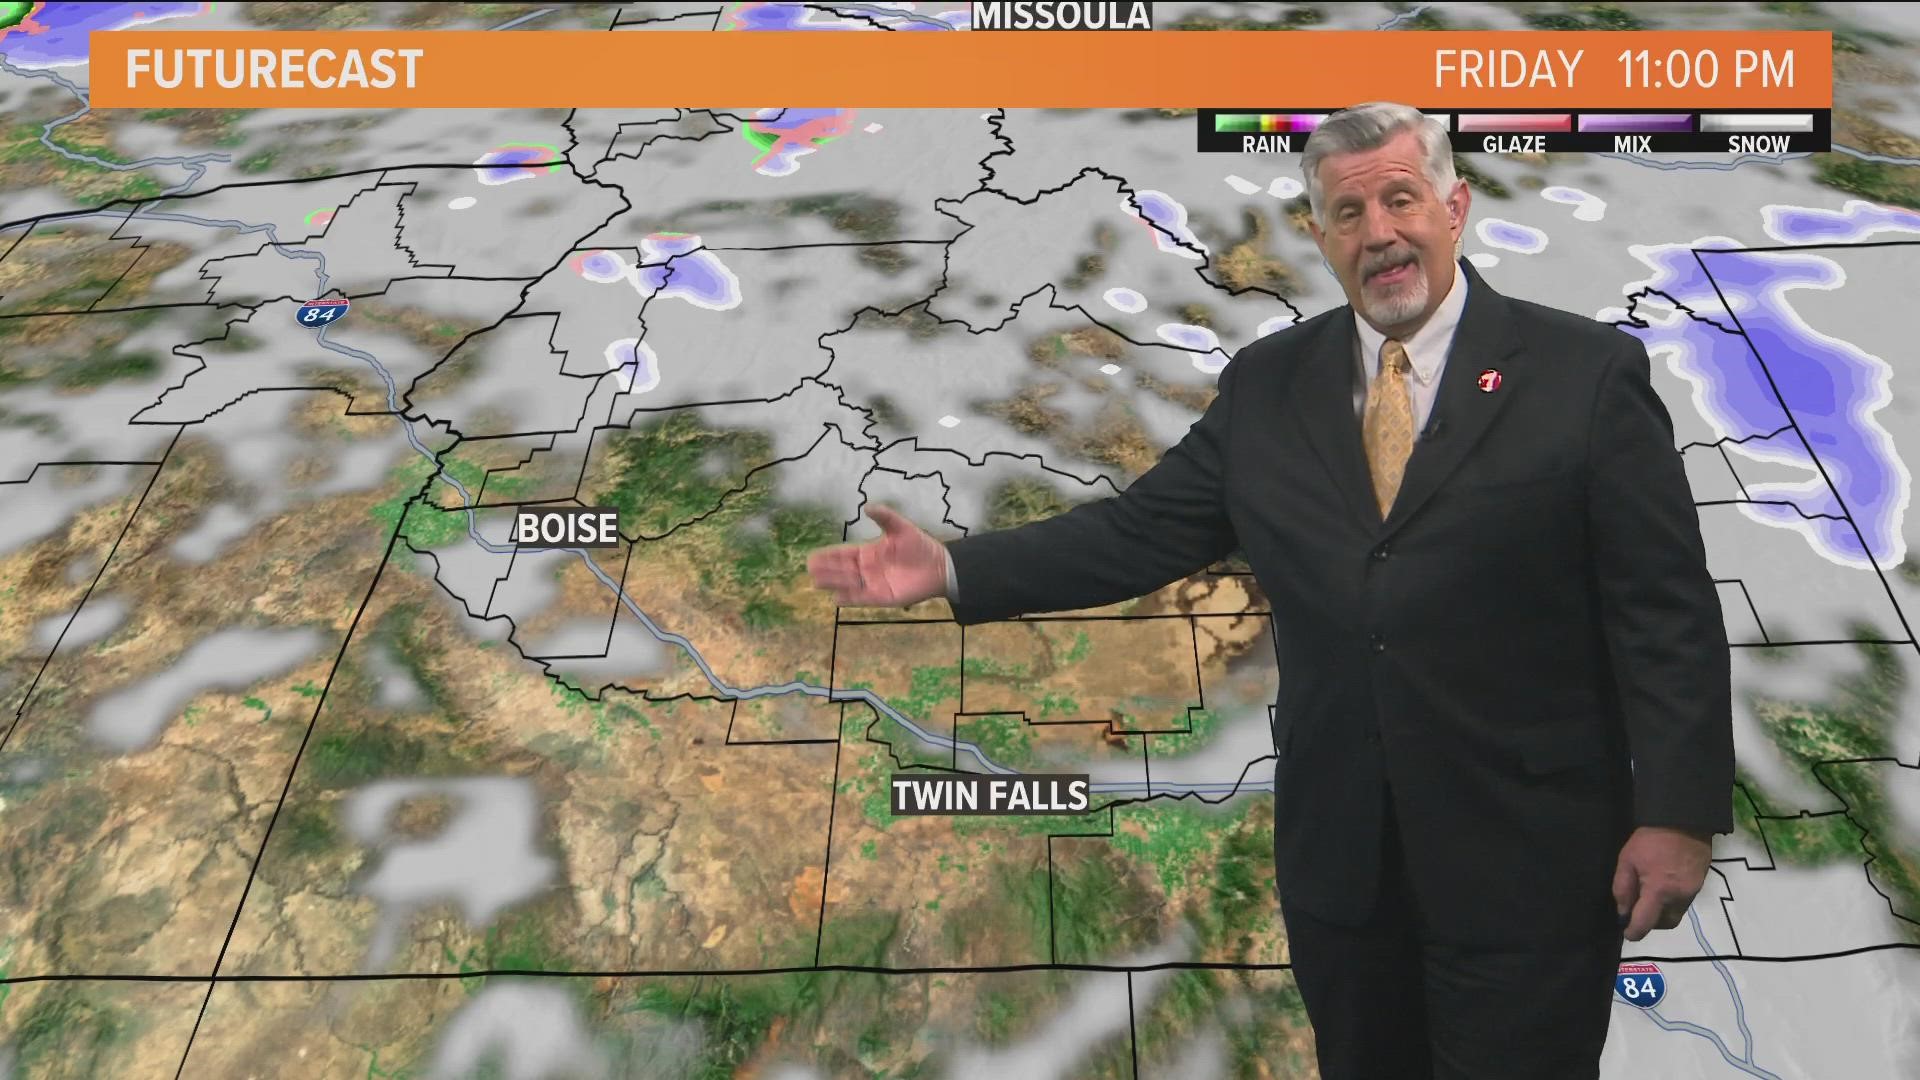 KTVB First Alert Weather Thursday, Feb. 2, 2023, in Boise, Idaho, with meteorologist Jim Duthie.